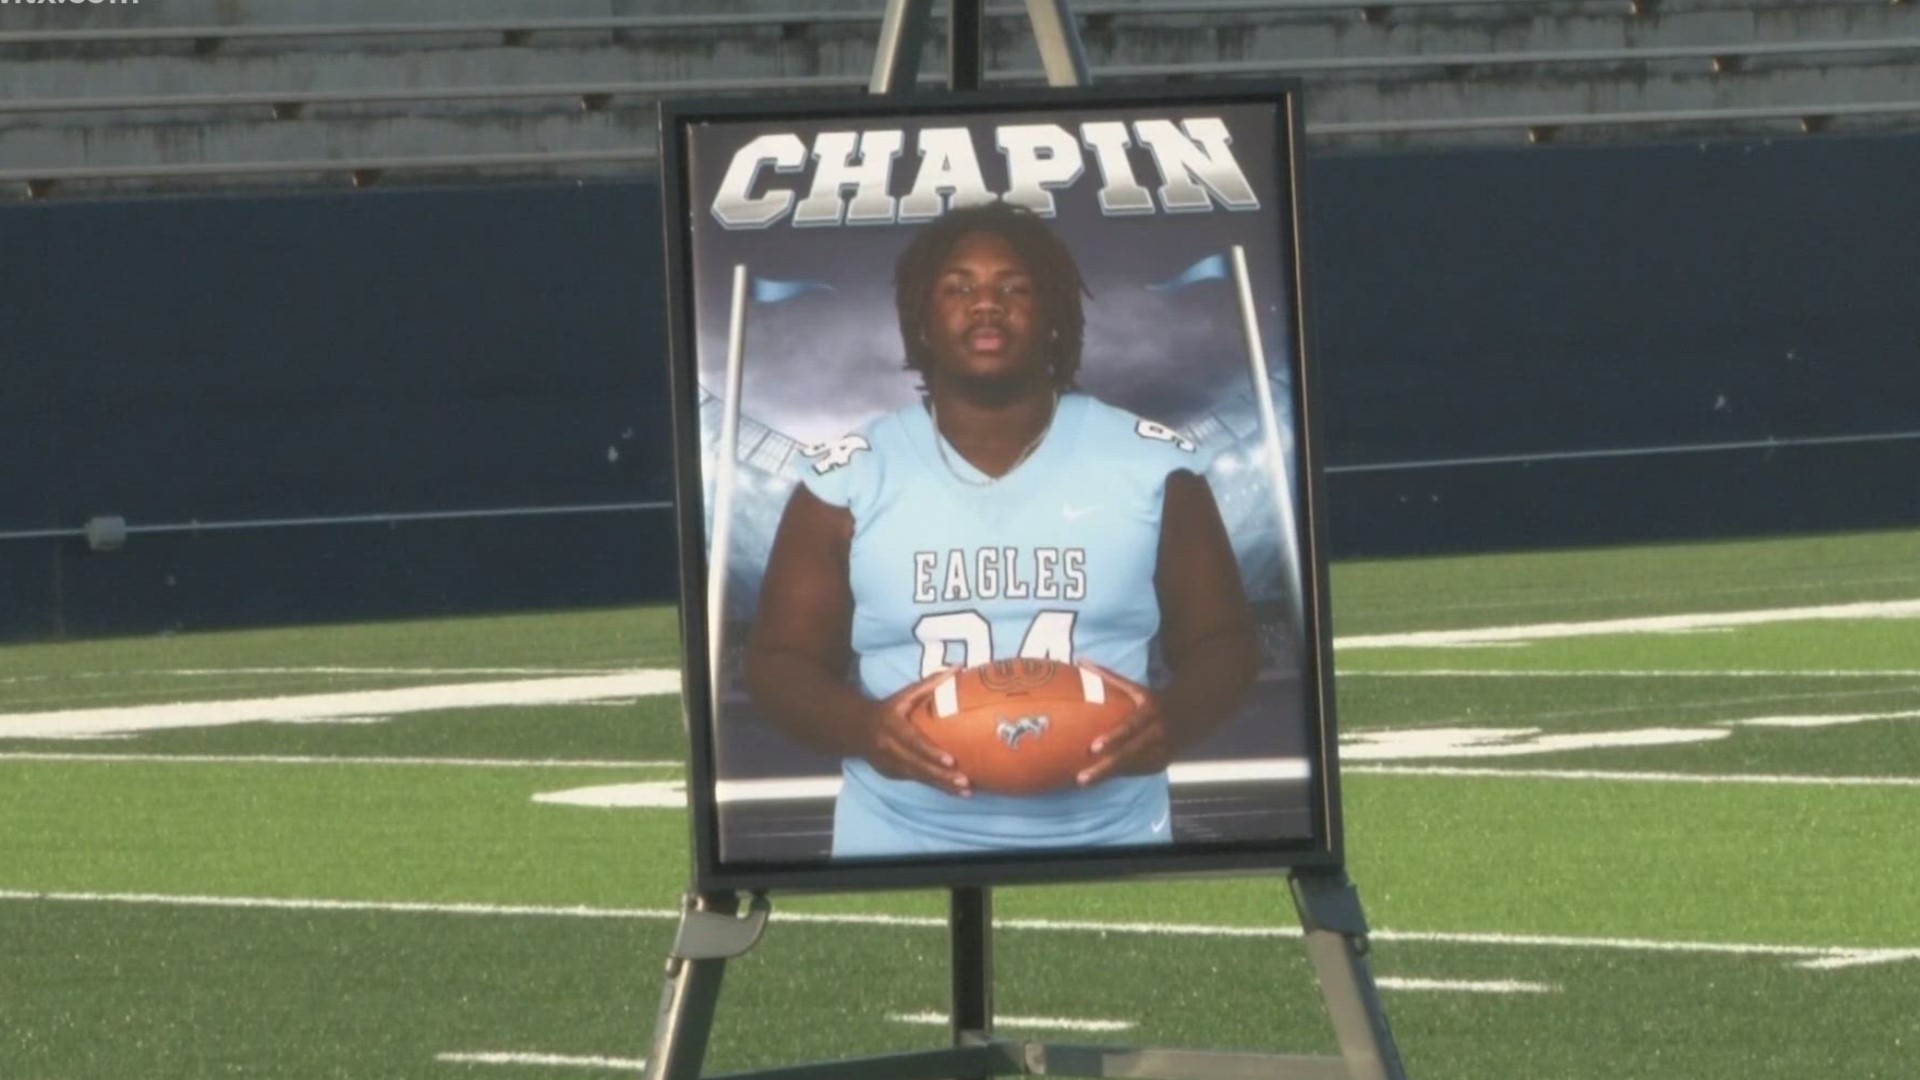 Members of the community gathered for a memorial service for 17-year-old Tre Ruff.